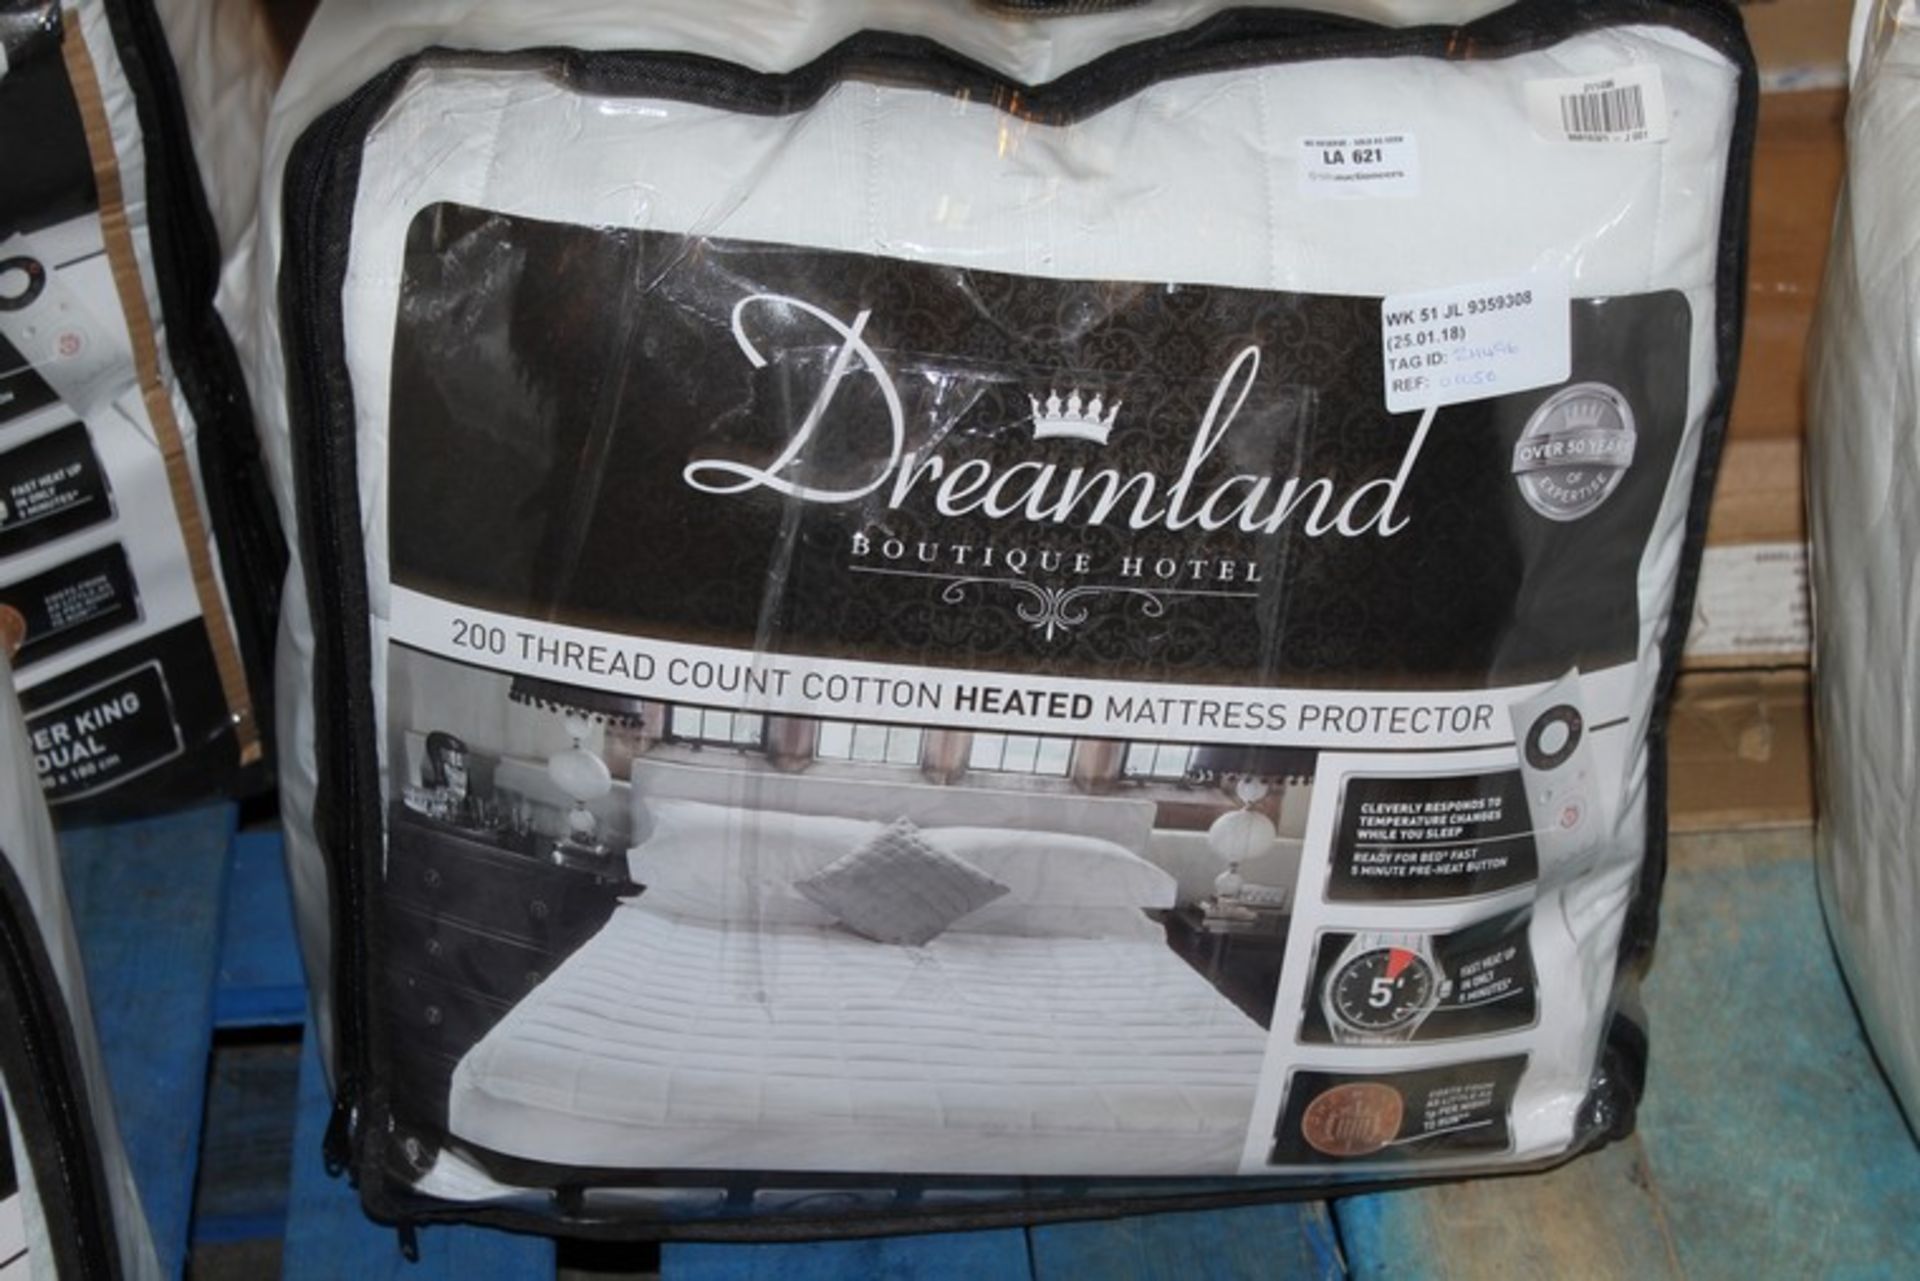 1 x DREAMLAND HOTEL HEATED MATTRESS PROTECTOR IN KING SIZE RRP £120 (211425) *PLEASE NOTE THAT THE